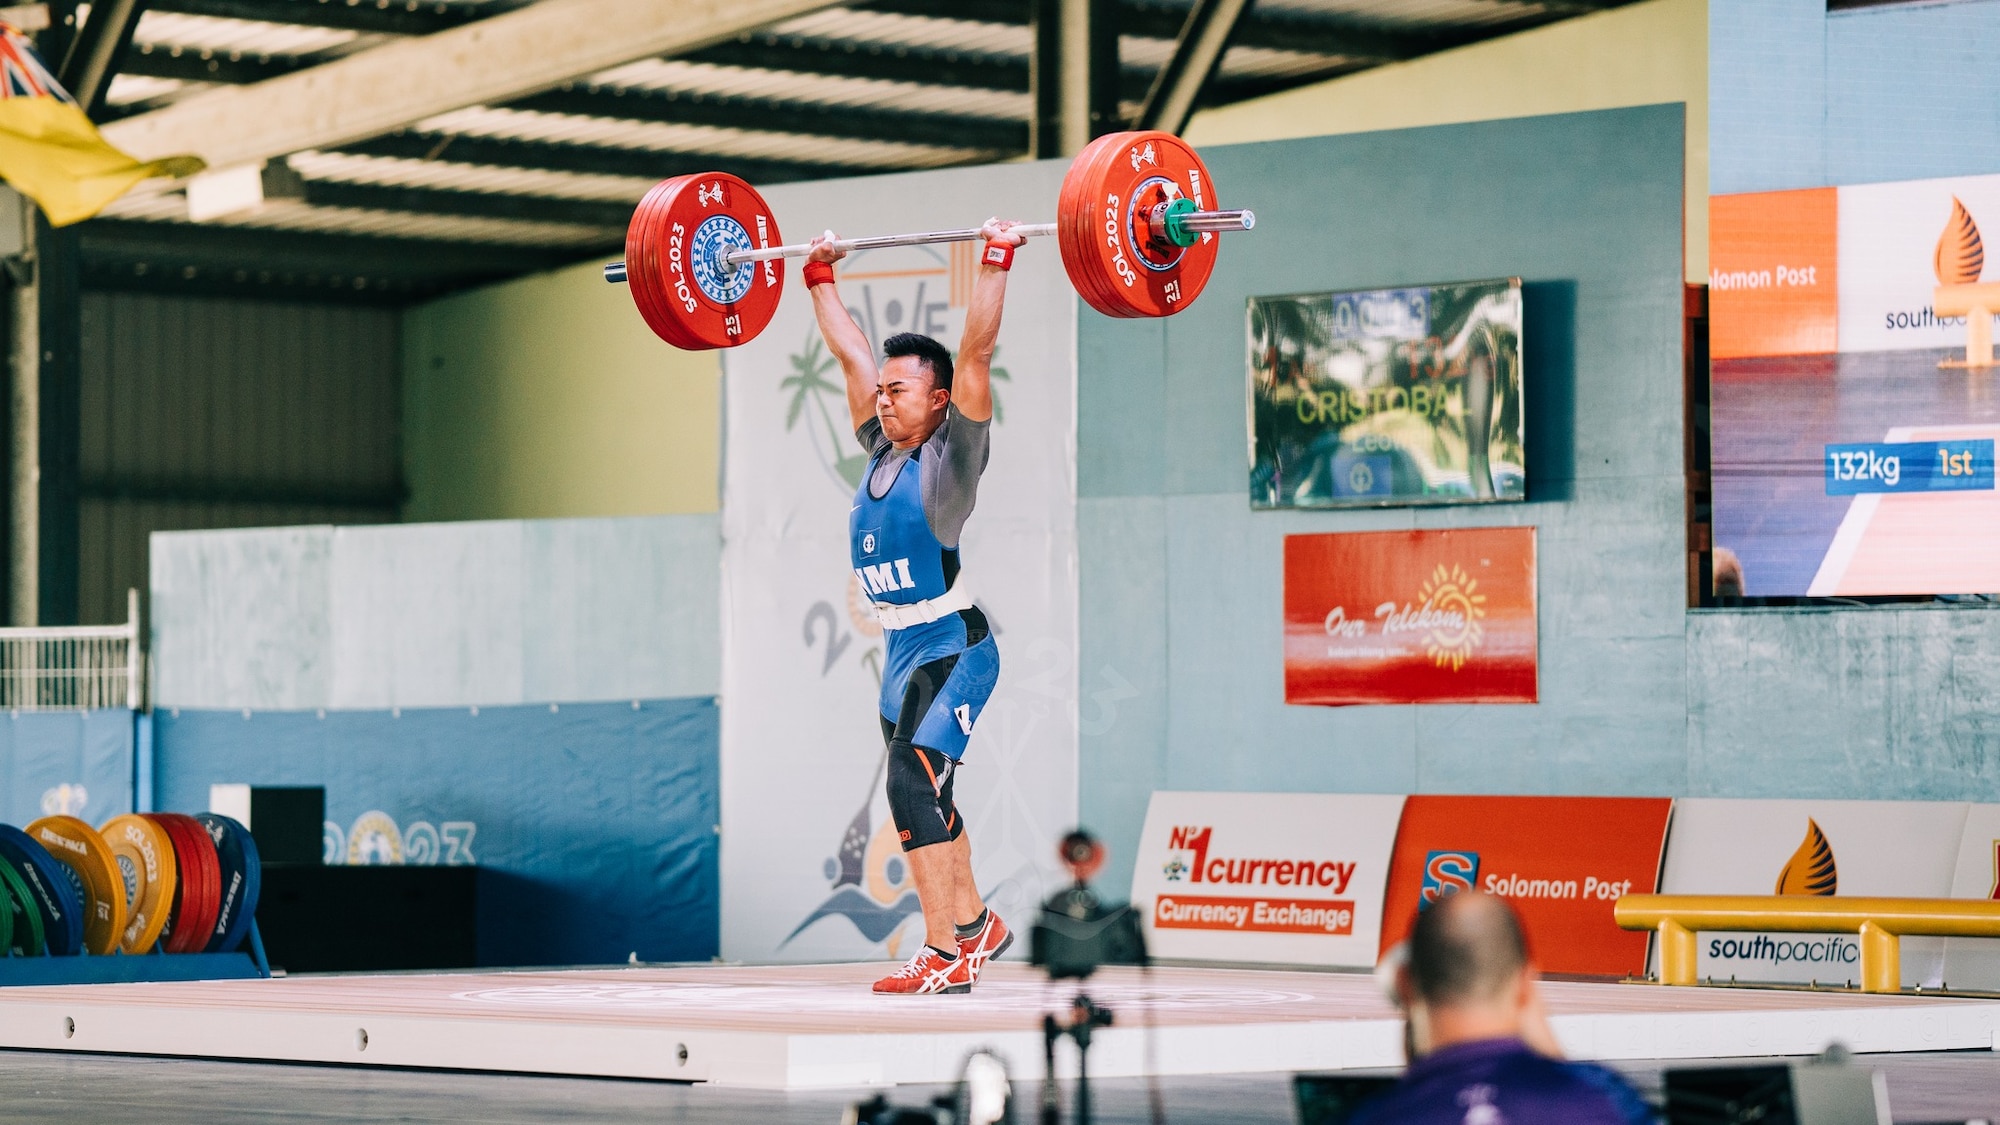 A photo of a weightlifter lifting weights